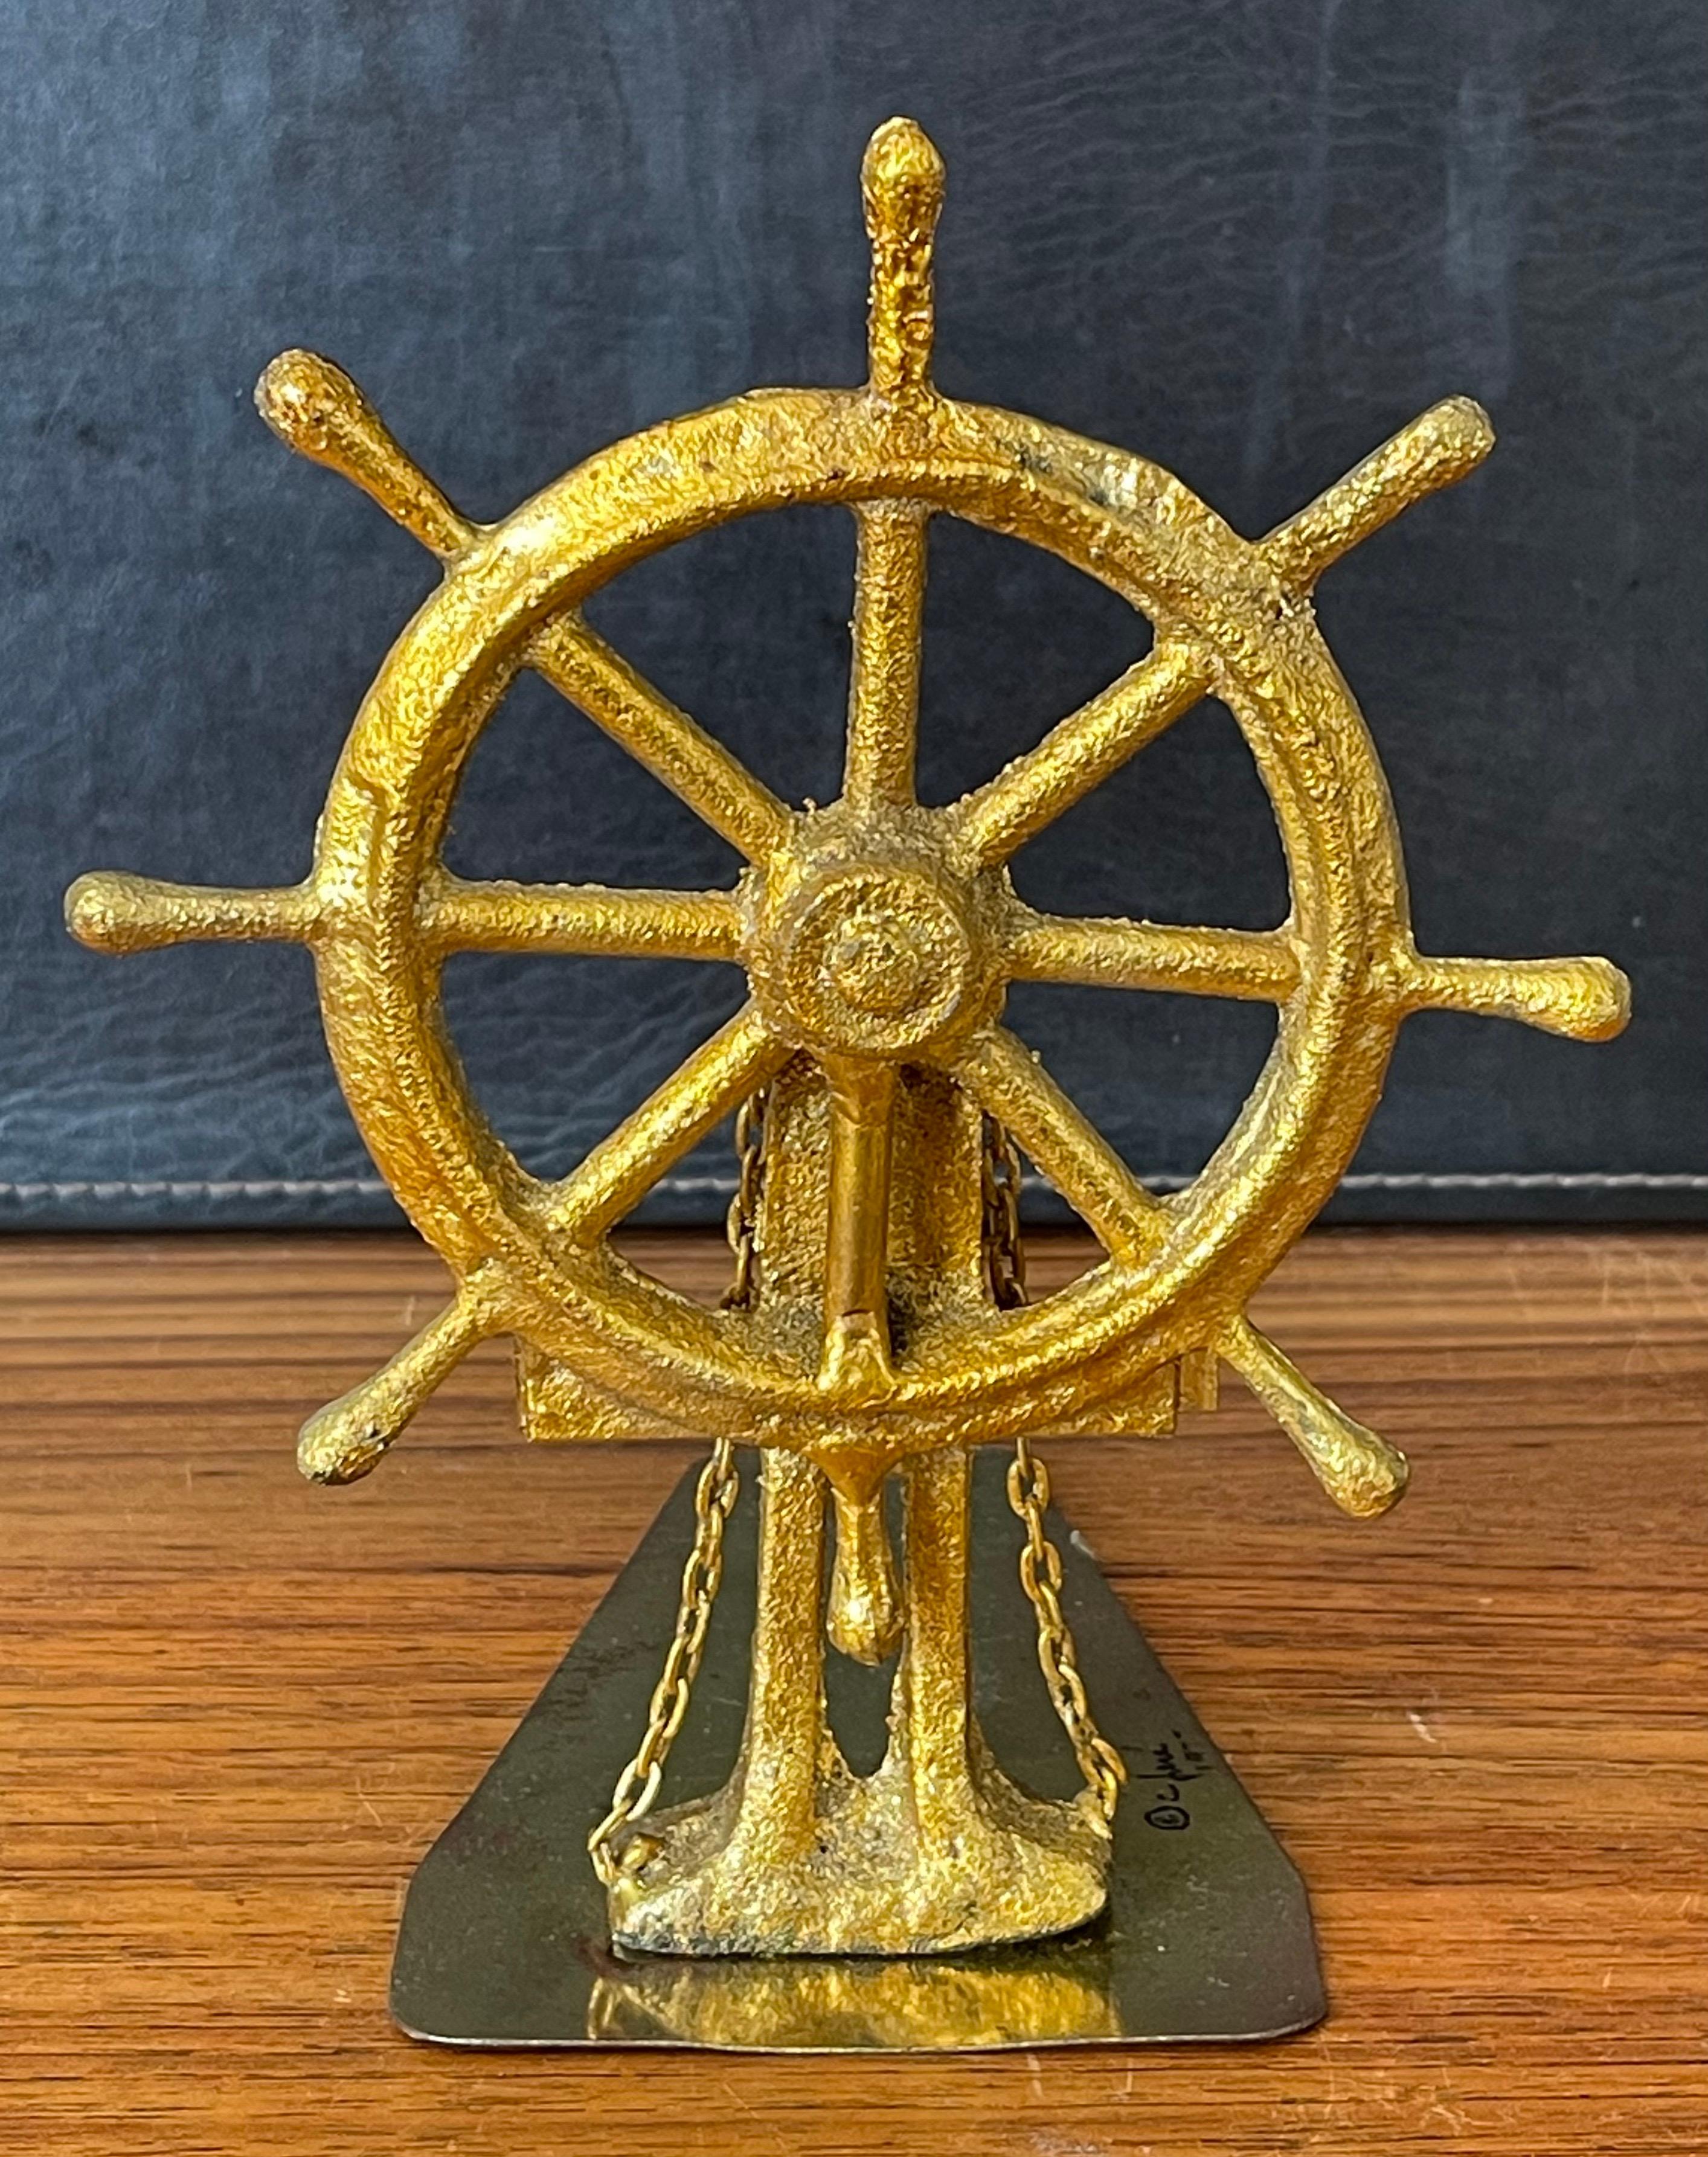 Pair of Ship Wheel Bookends in Gold Leaf Finish by Curtis Jere for Artisan House 1